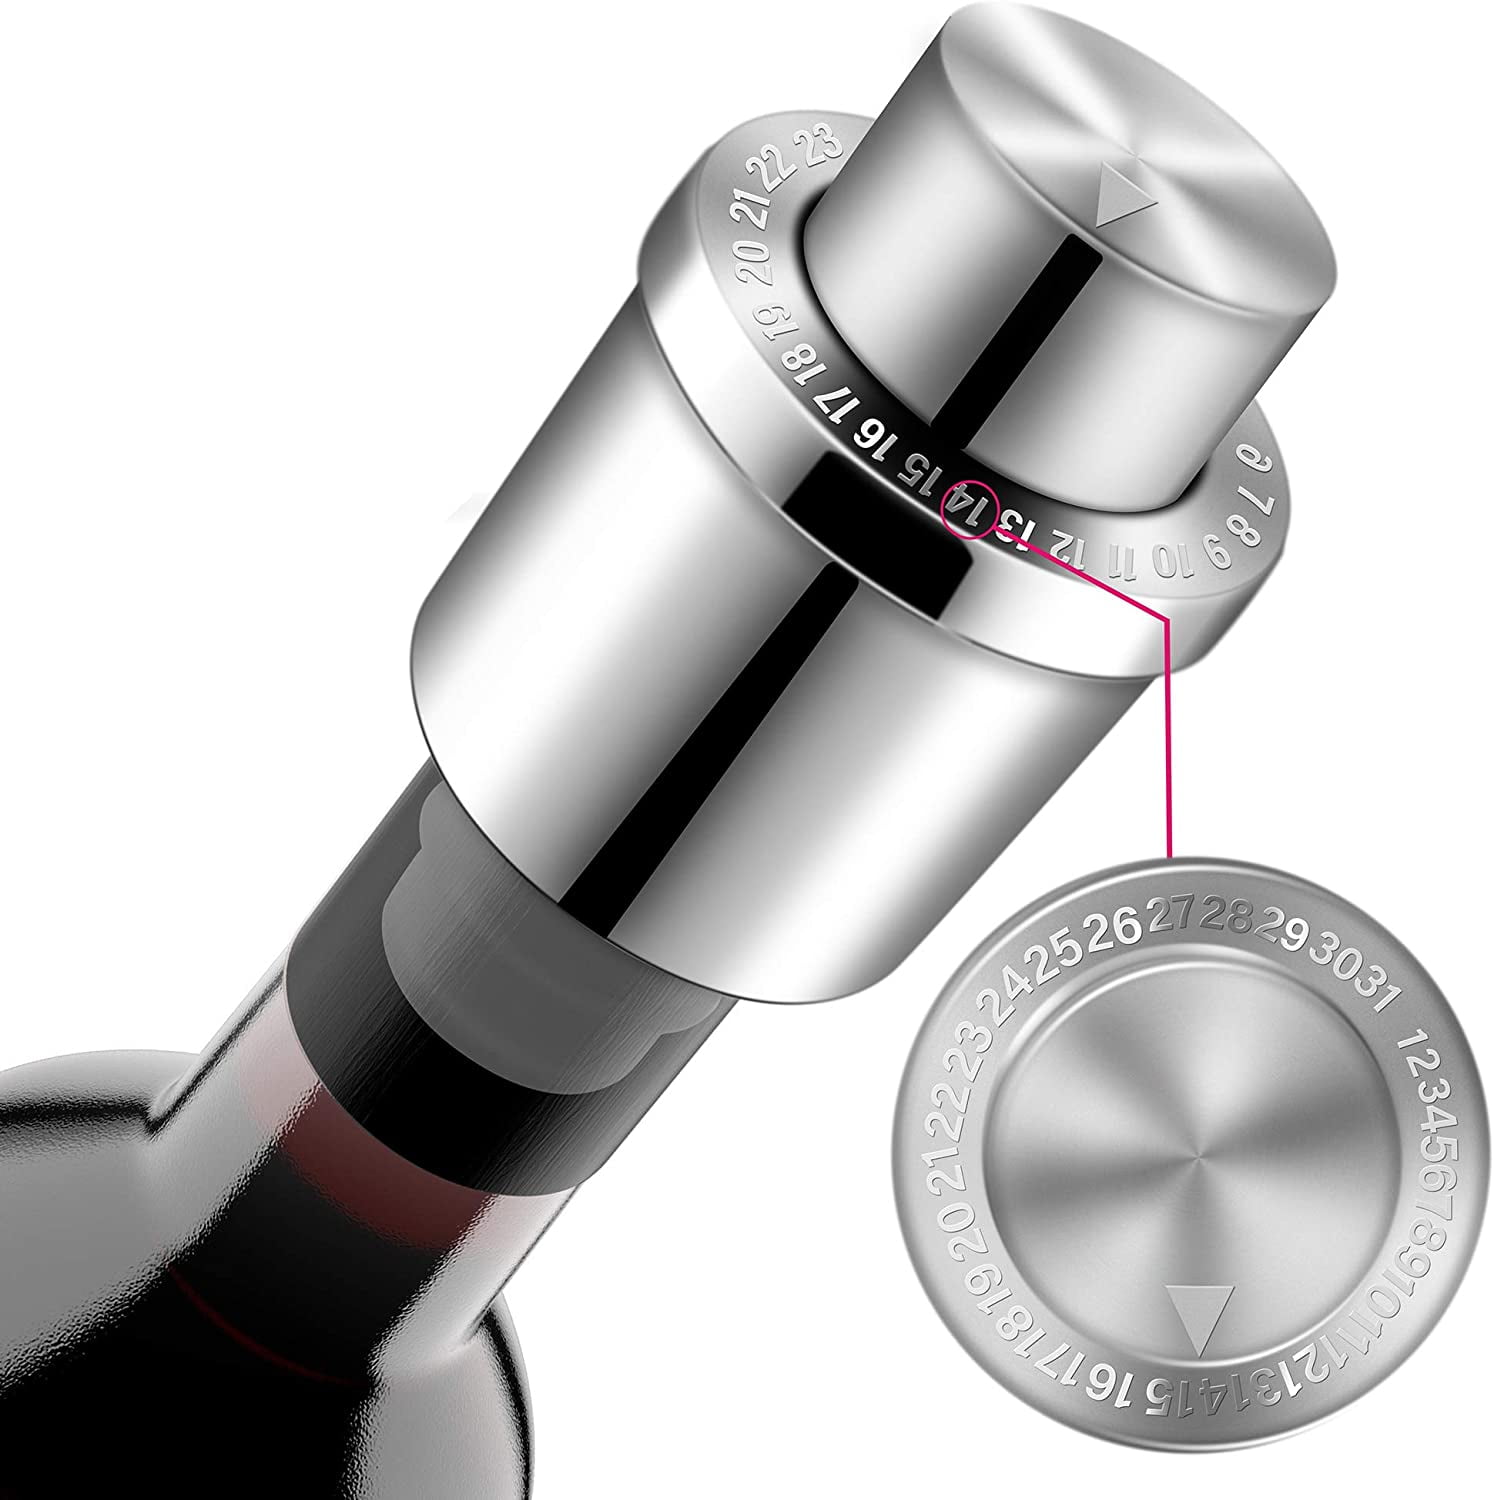 Stainless Steel Wine Bottle Stopper Reusable Silicone Vacuum Wine Stoppers with Time Scale Record GiniHomer Wine Stoppers